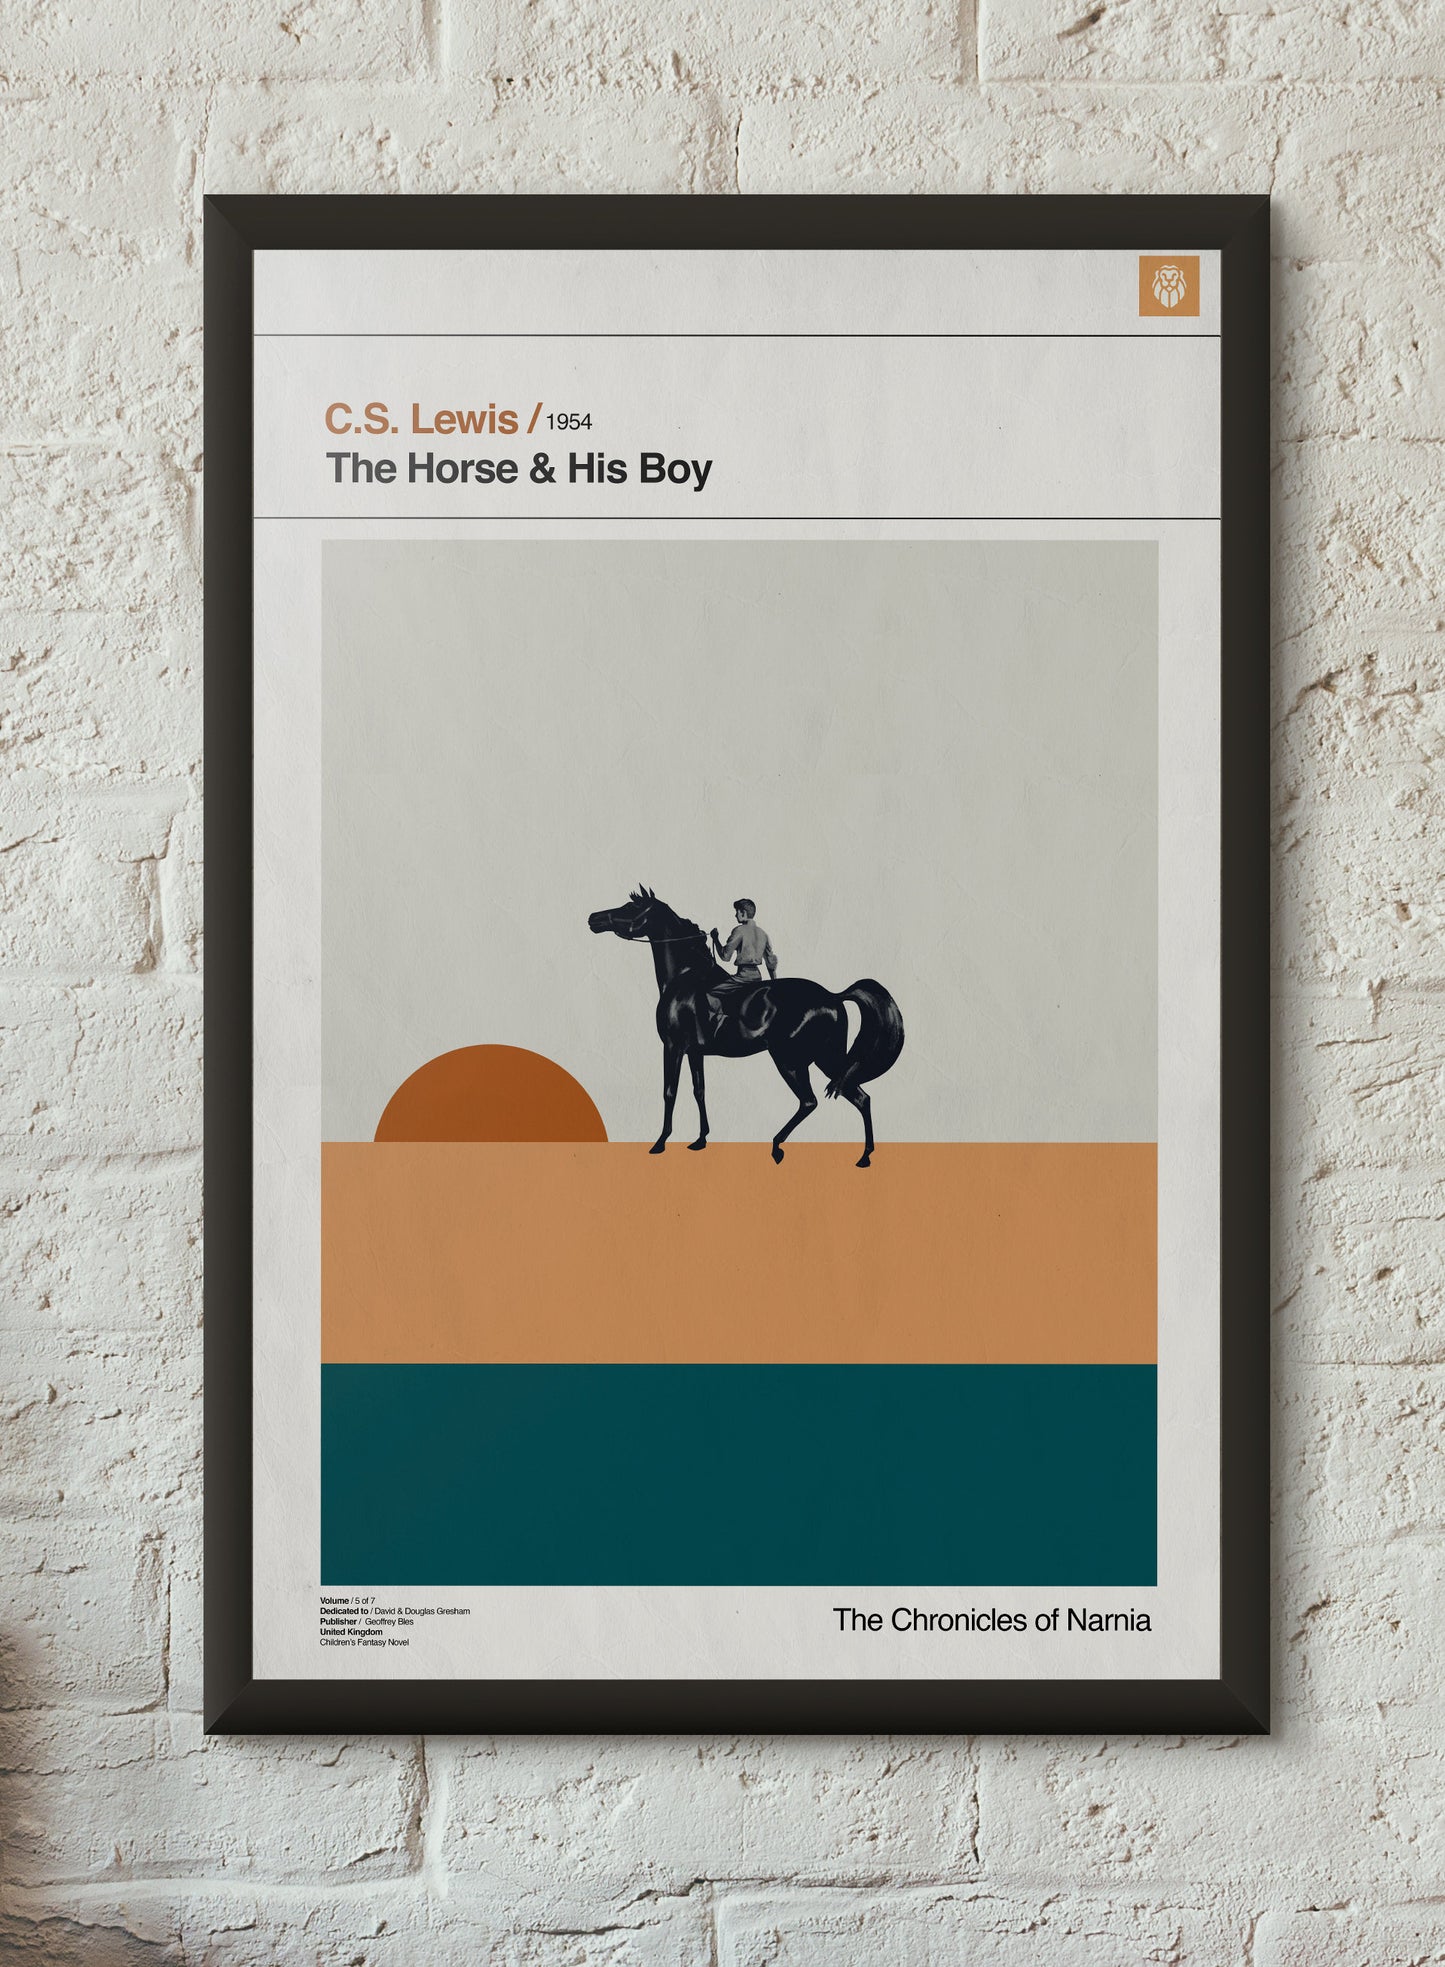 The Horse & His Boy - C.S. LEWIS - Chronicles of Narnia